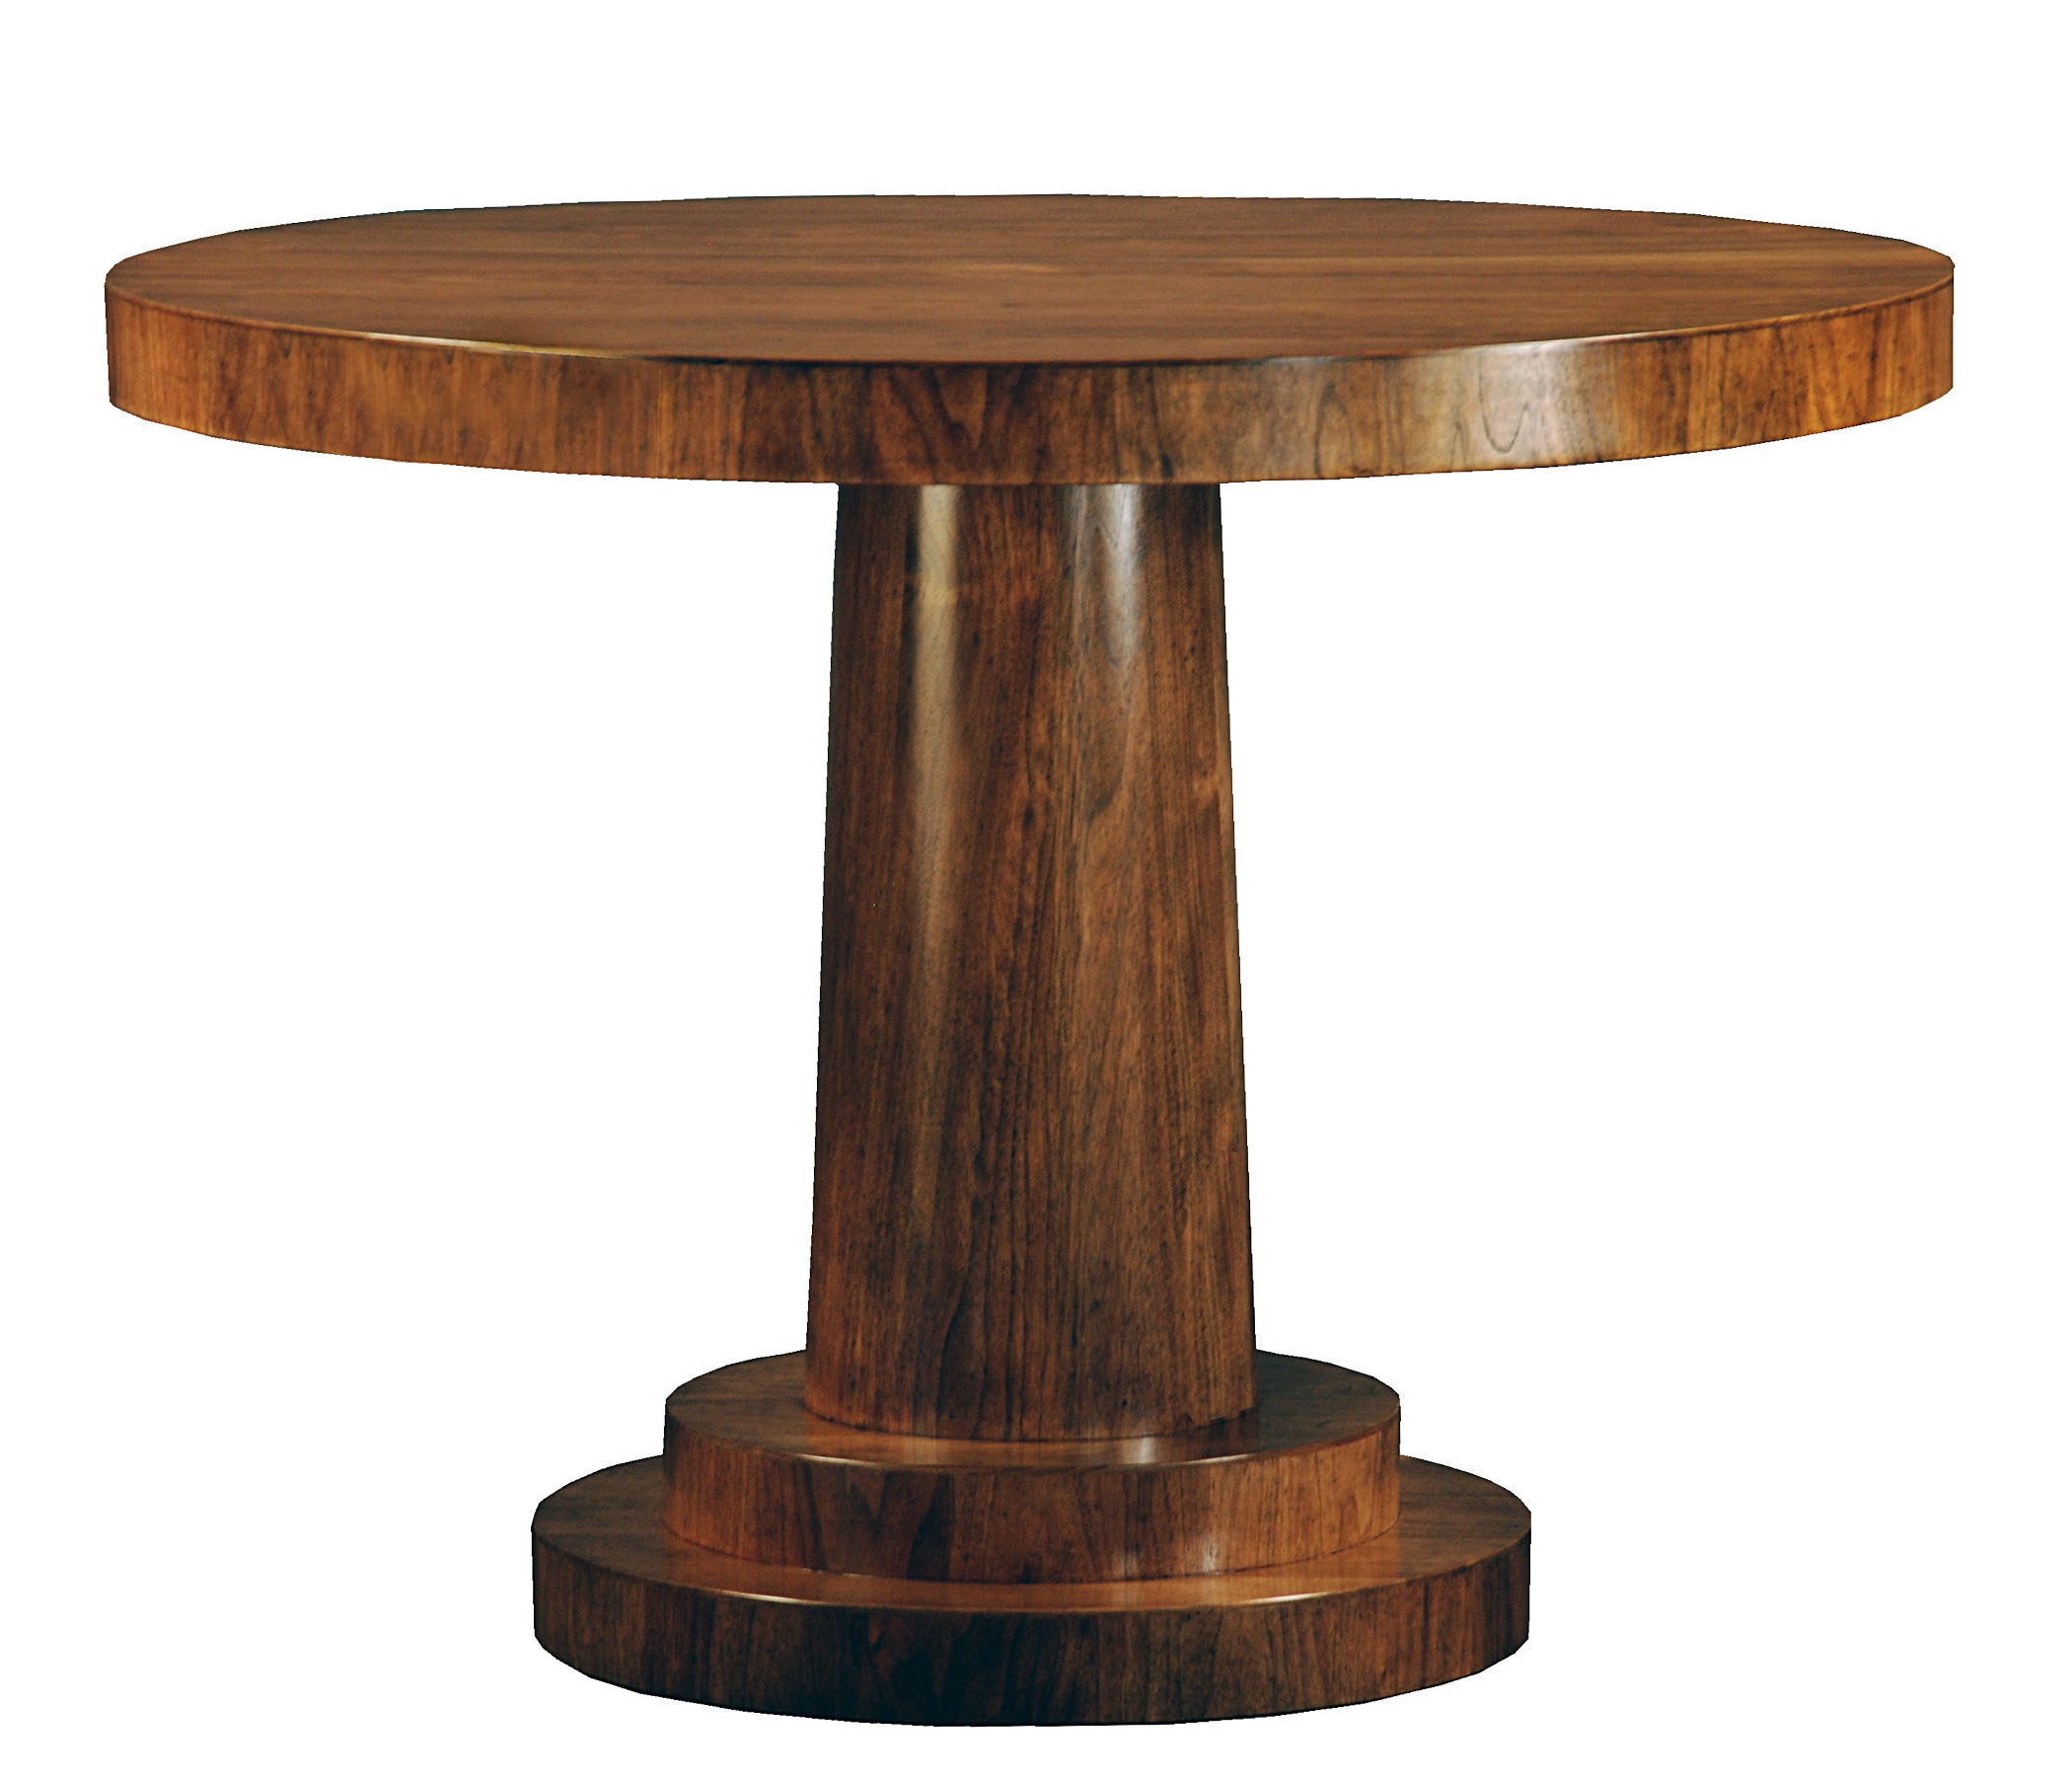 Lanchester contemporary modern center dining table by Woodland furniture in Idaho Falls